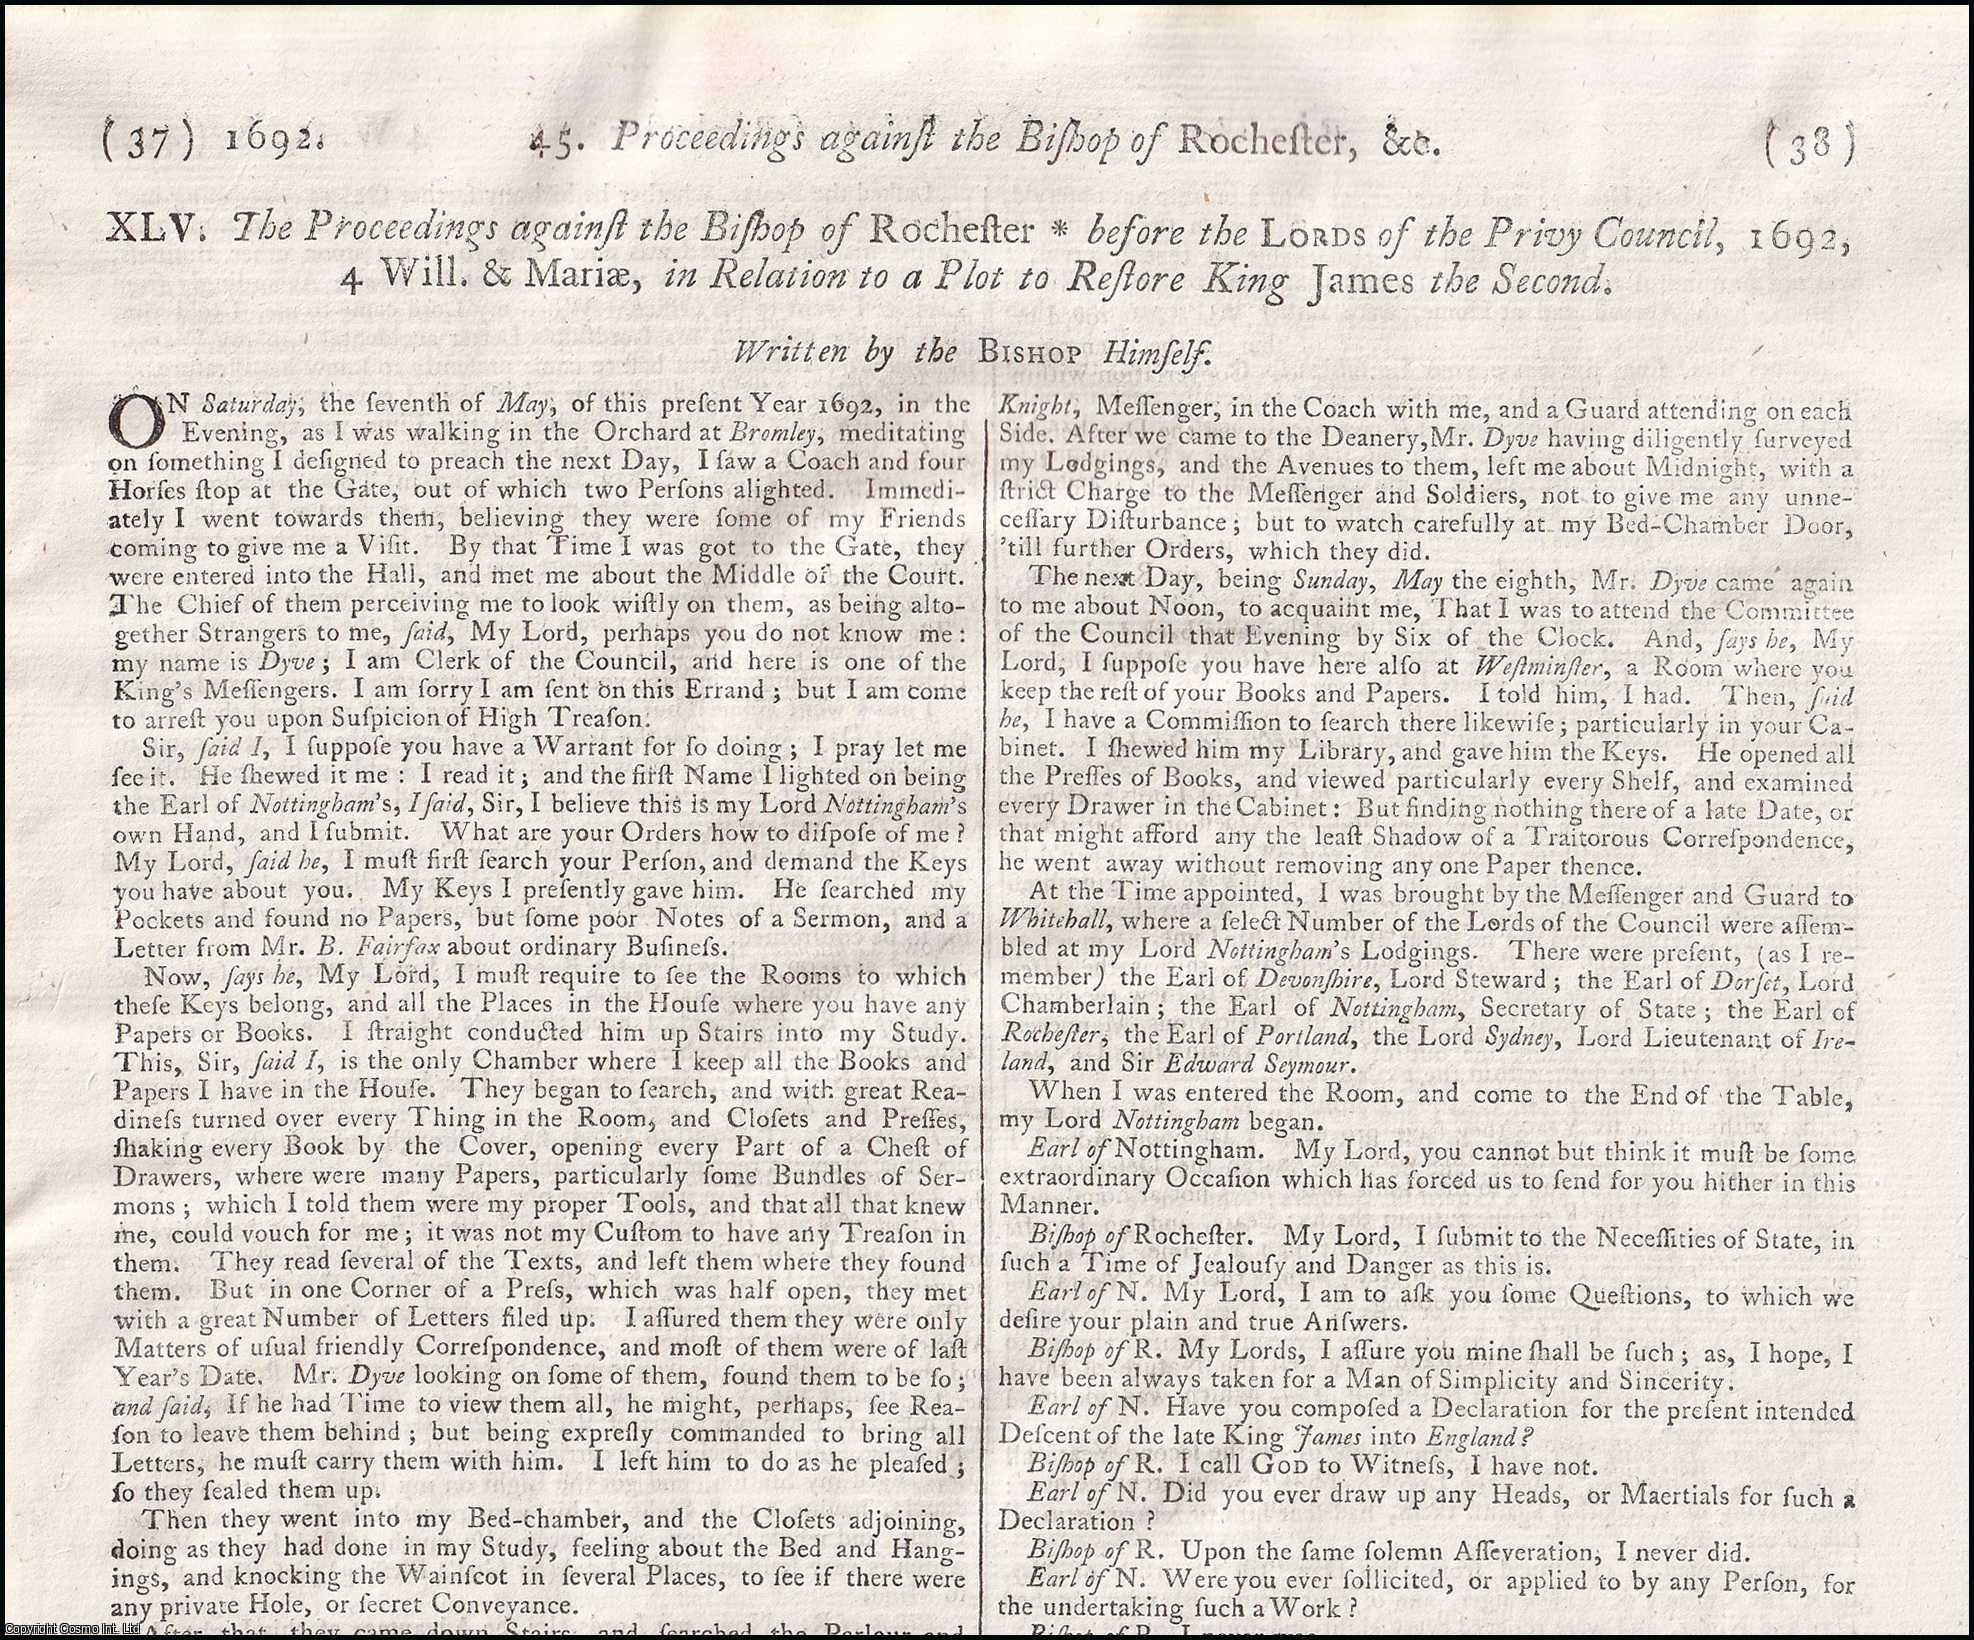 [Trial]. - The Proceedings against the Bishop of Rochester before the Lords of the Privy Council, 1692, 4 Will. and Mariae, in Relation to a Plot to Restore King James the Second. An original report from the Collected State Trials.